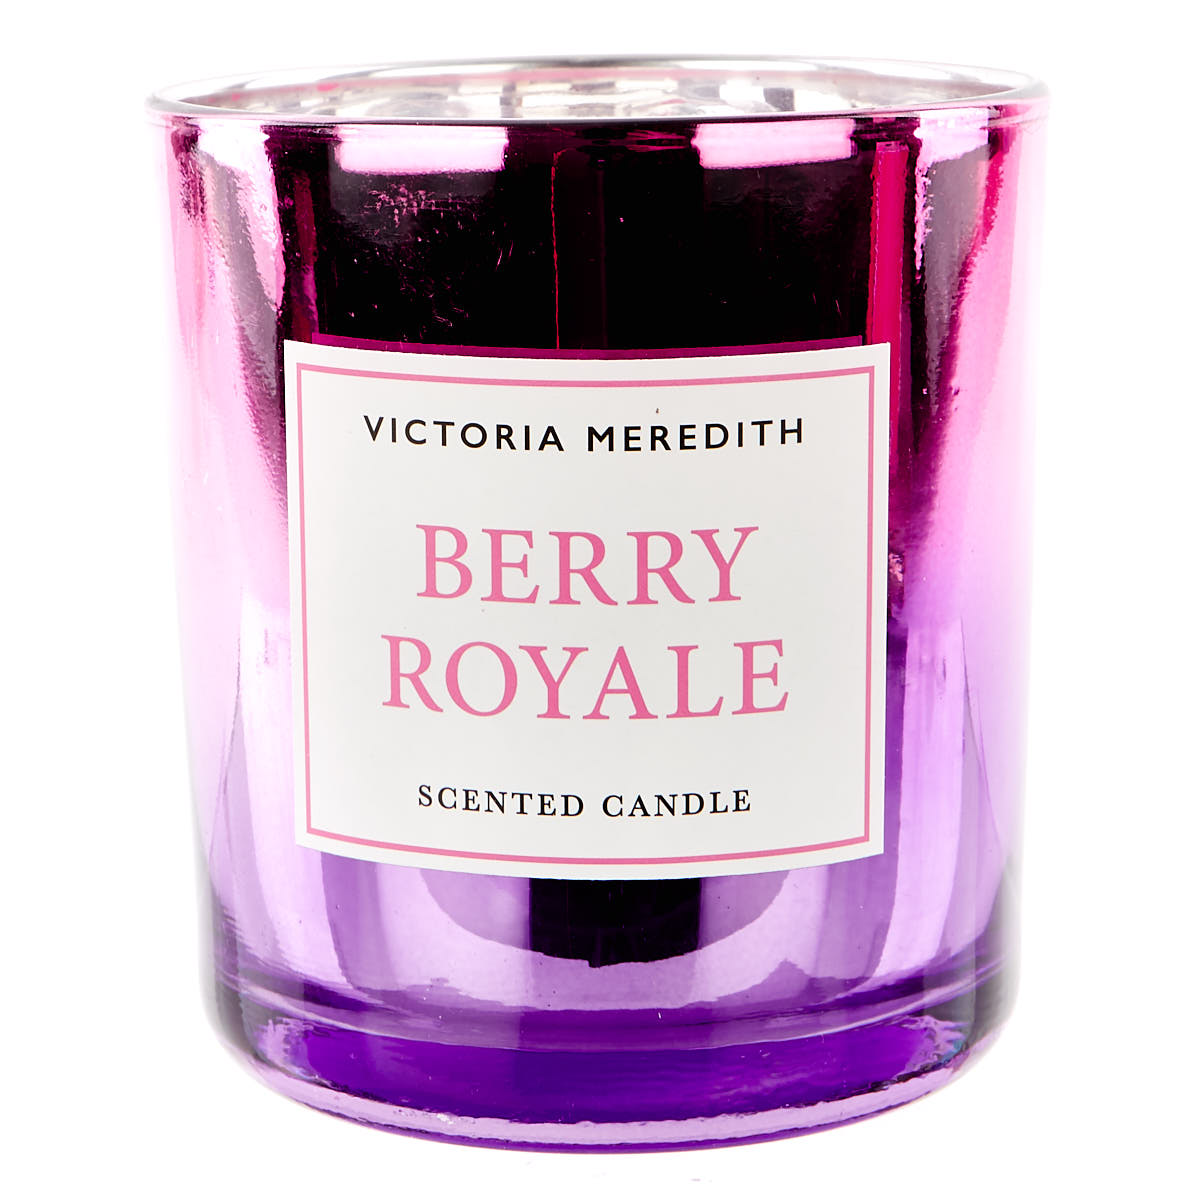 Victoria Meredith Berry Royale Scented Candle